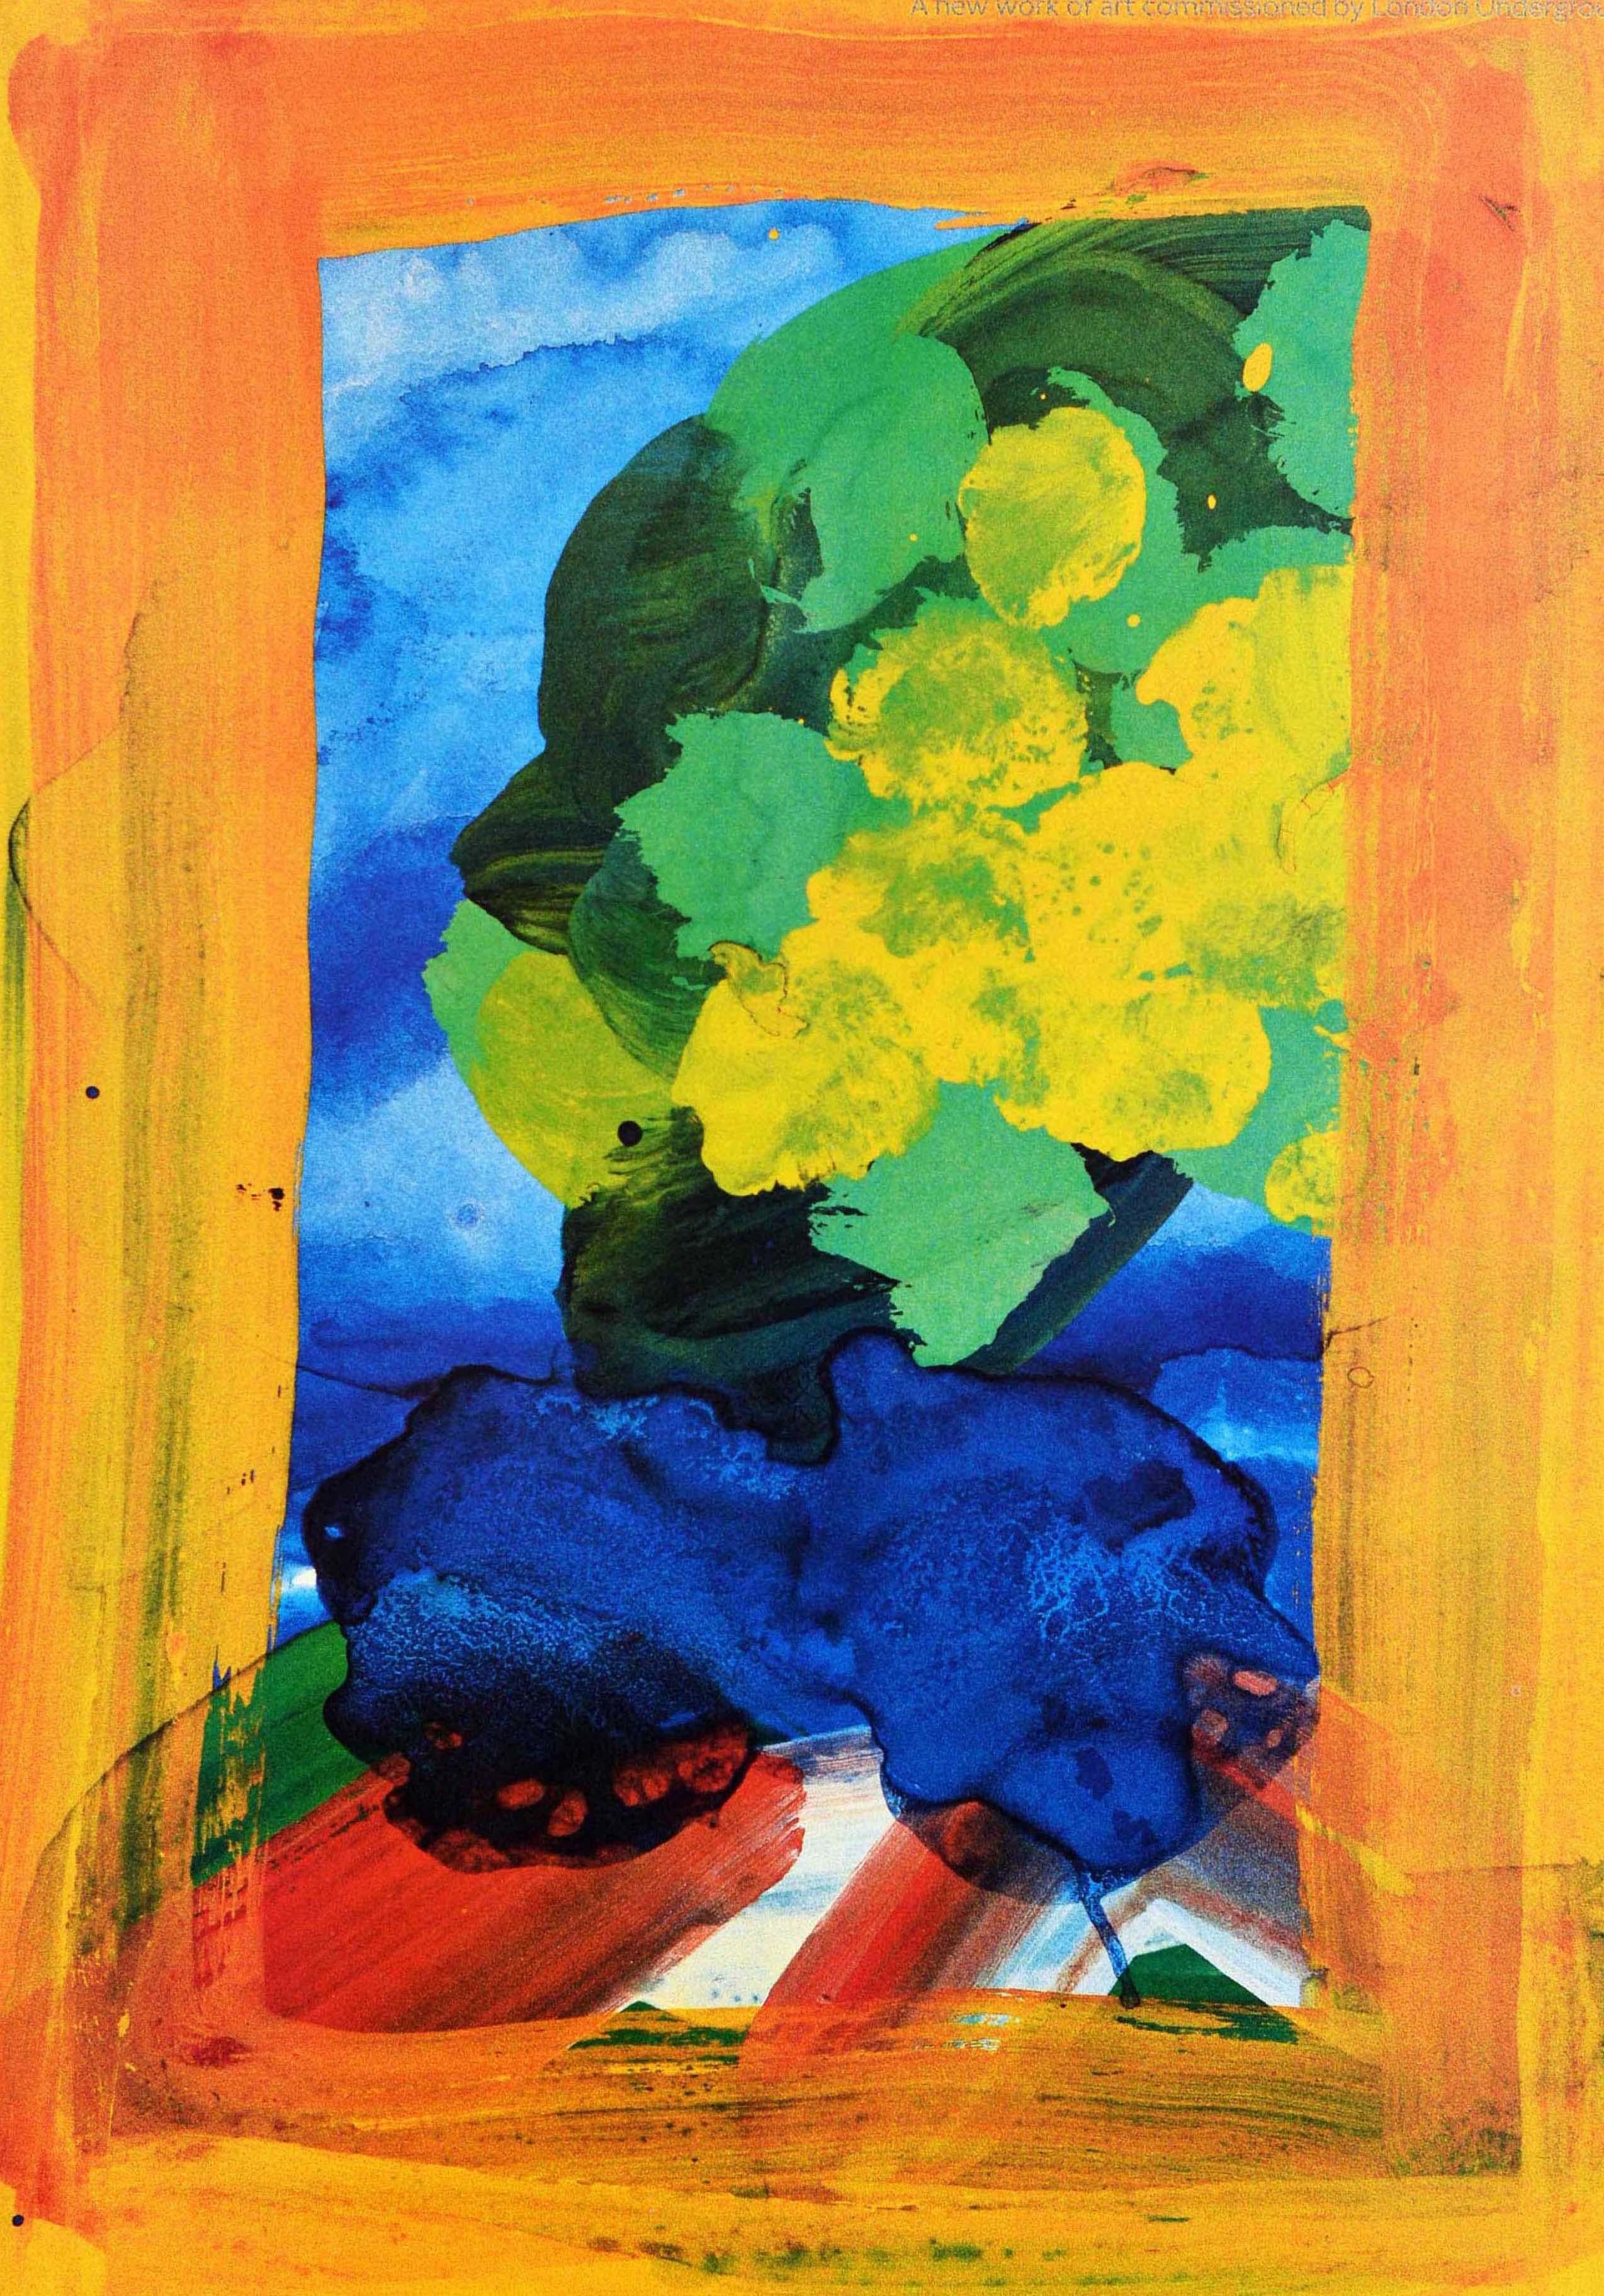 Original vintage London Underground poster - Highgate Ponds nearest stations Hampstead, Highgate. Colourful painterly image of flowers, trees and water inside a yellow orange framed border. Highgate Ponds by Howard Hodgkin a new work of art